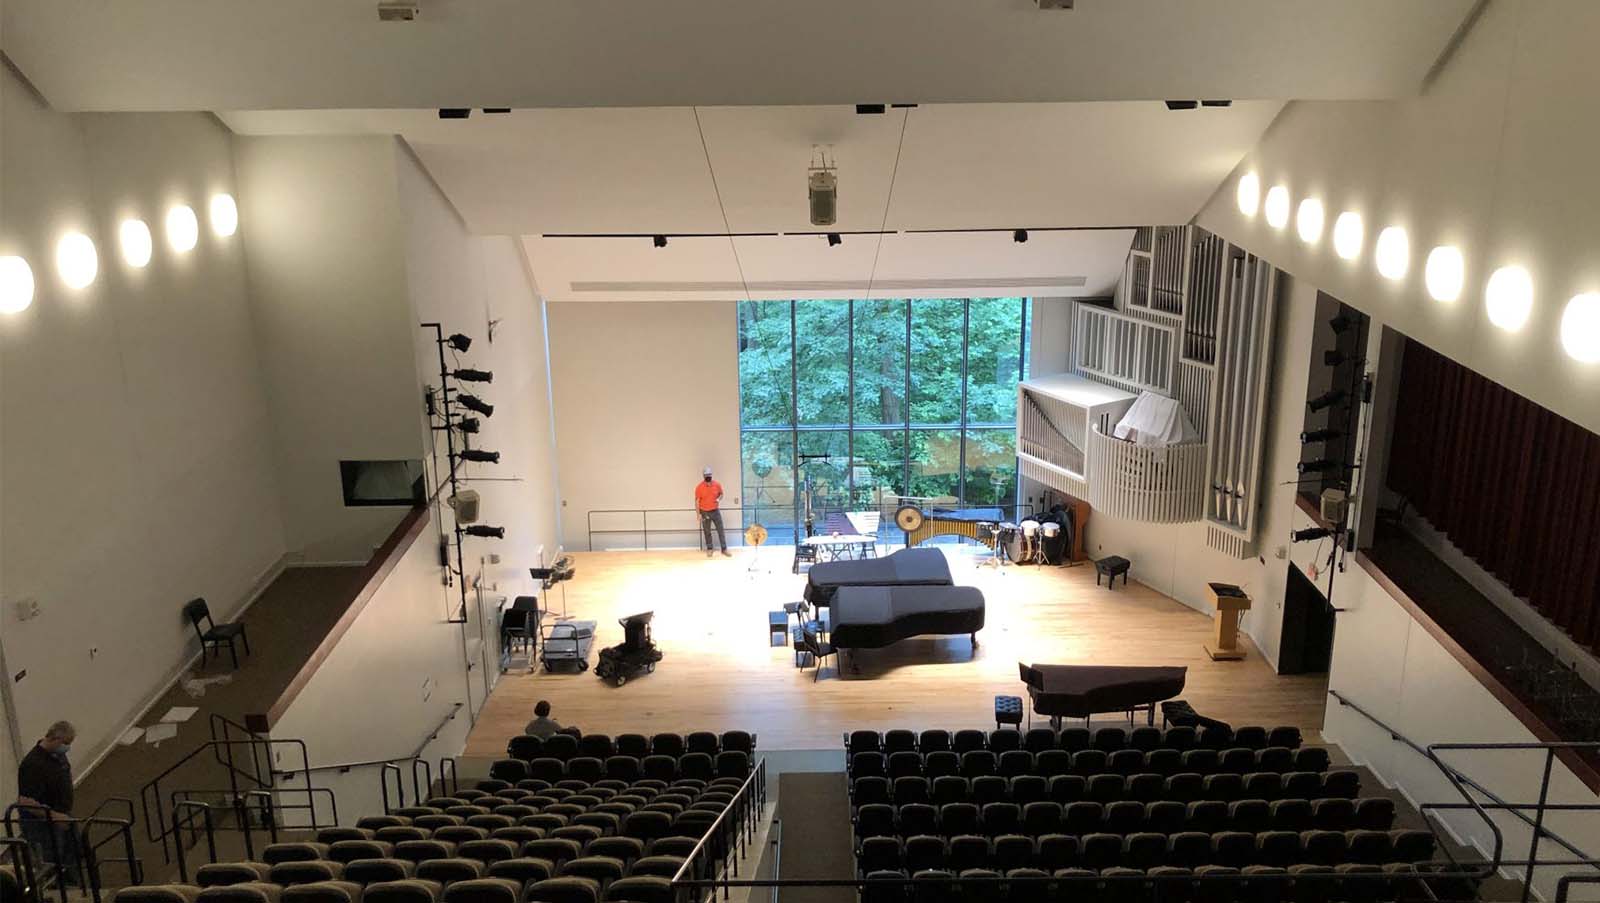 Swarthmore College Lang Music Building Renovation Recital Hall view from Seats